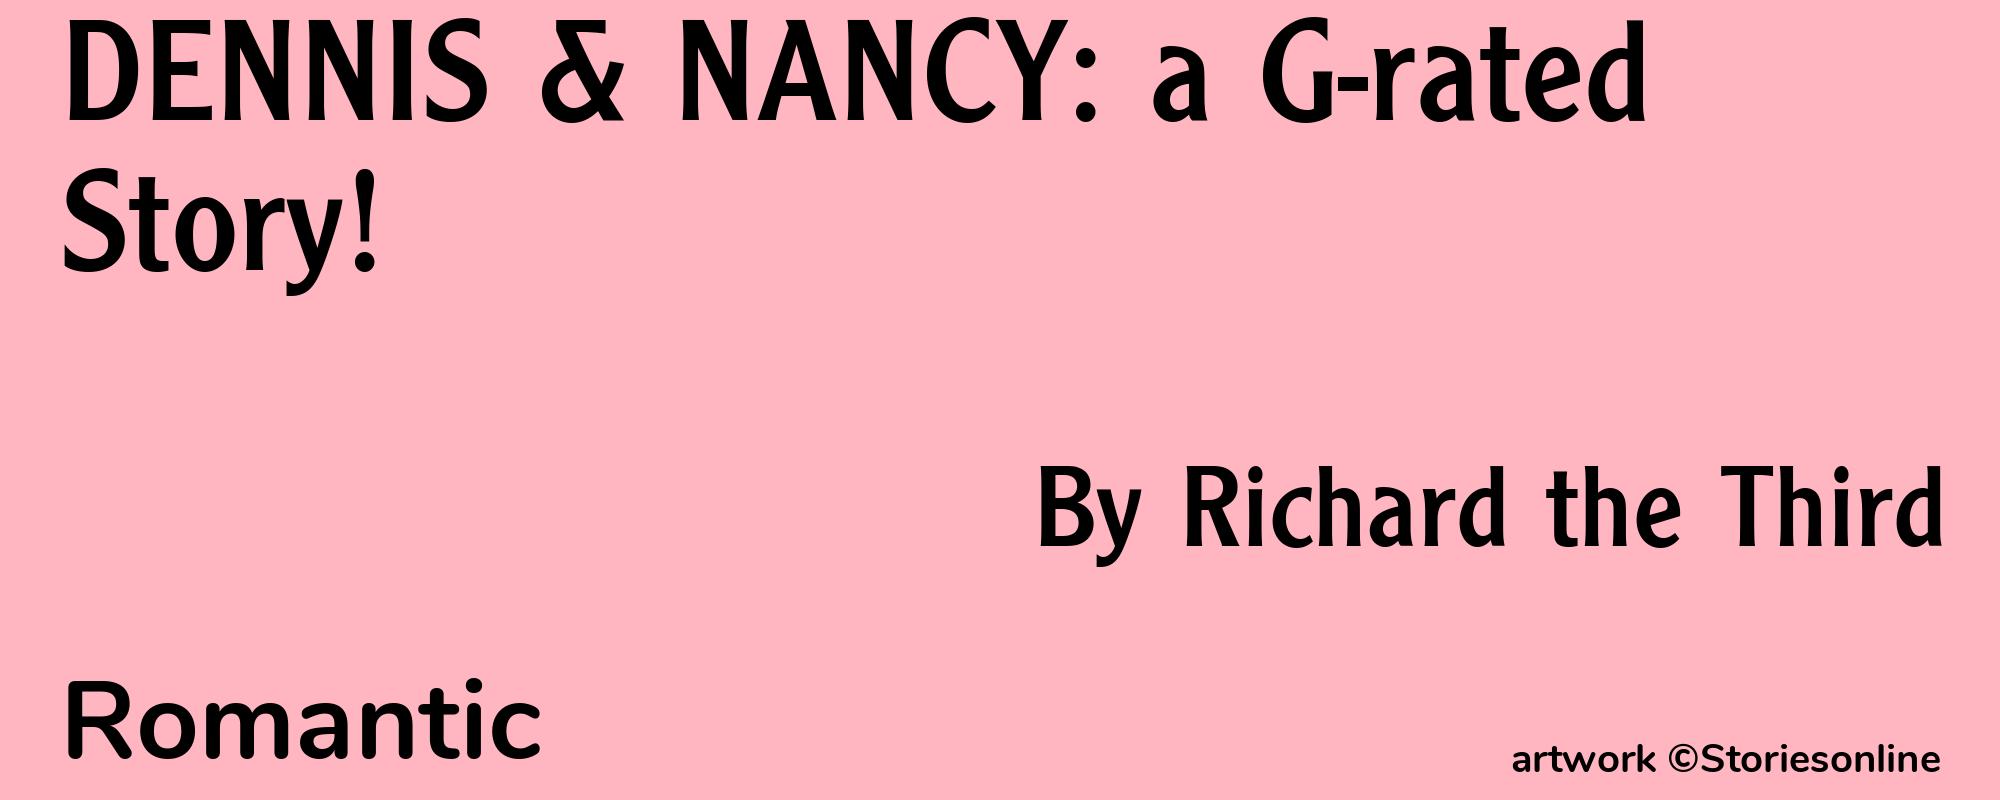 DENNIS & NANCY: a G-rated Story! - Cover